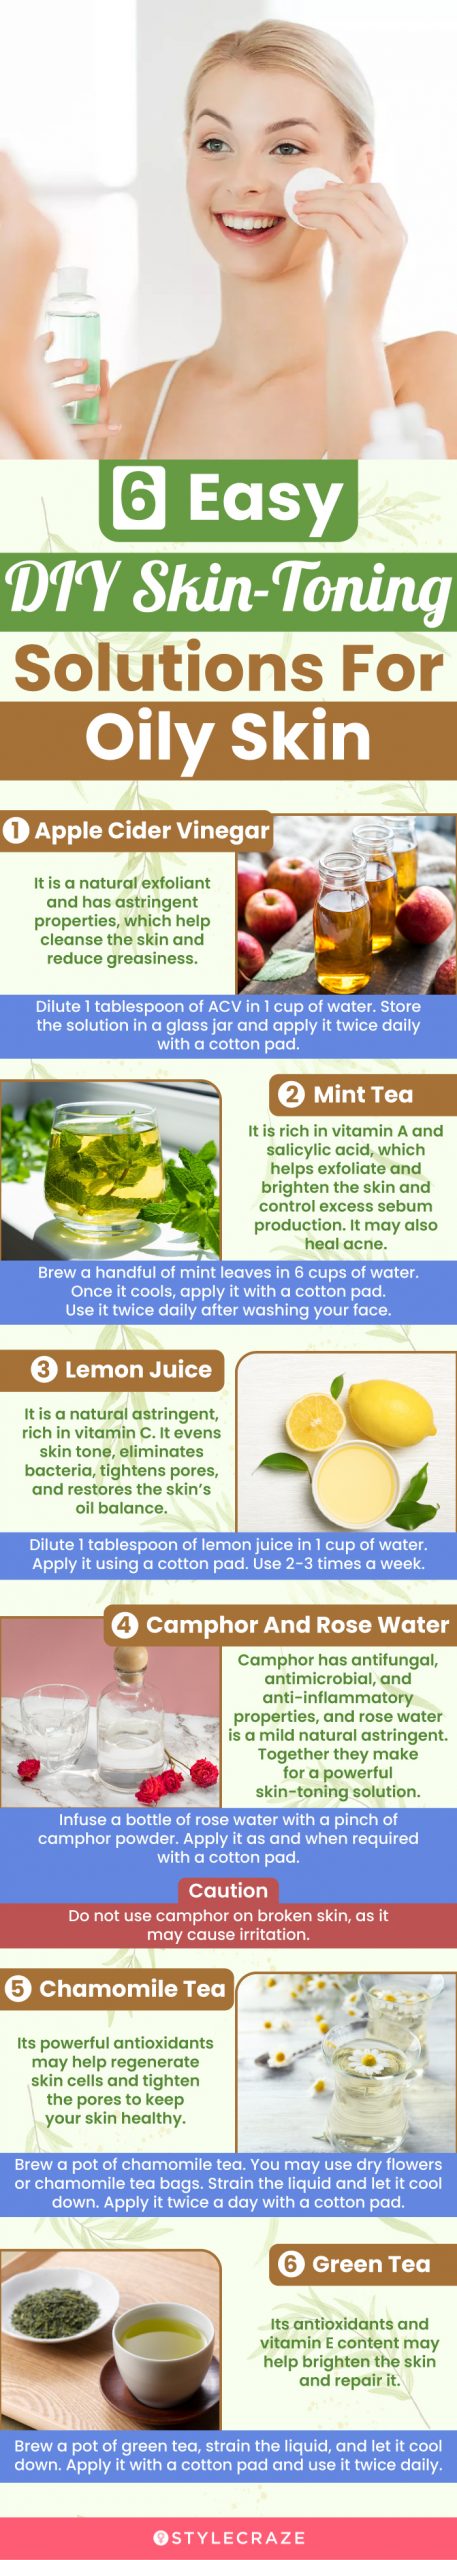 6 easy diy skintoning solutions for oily skin (infographic)